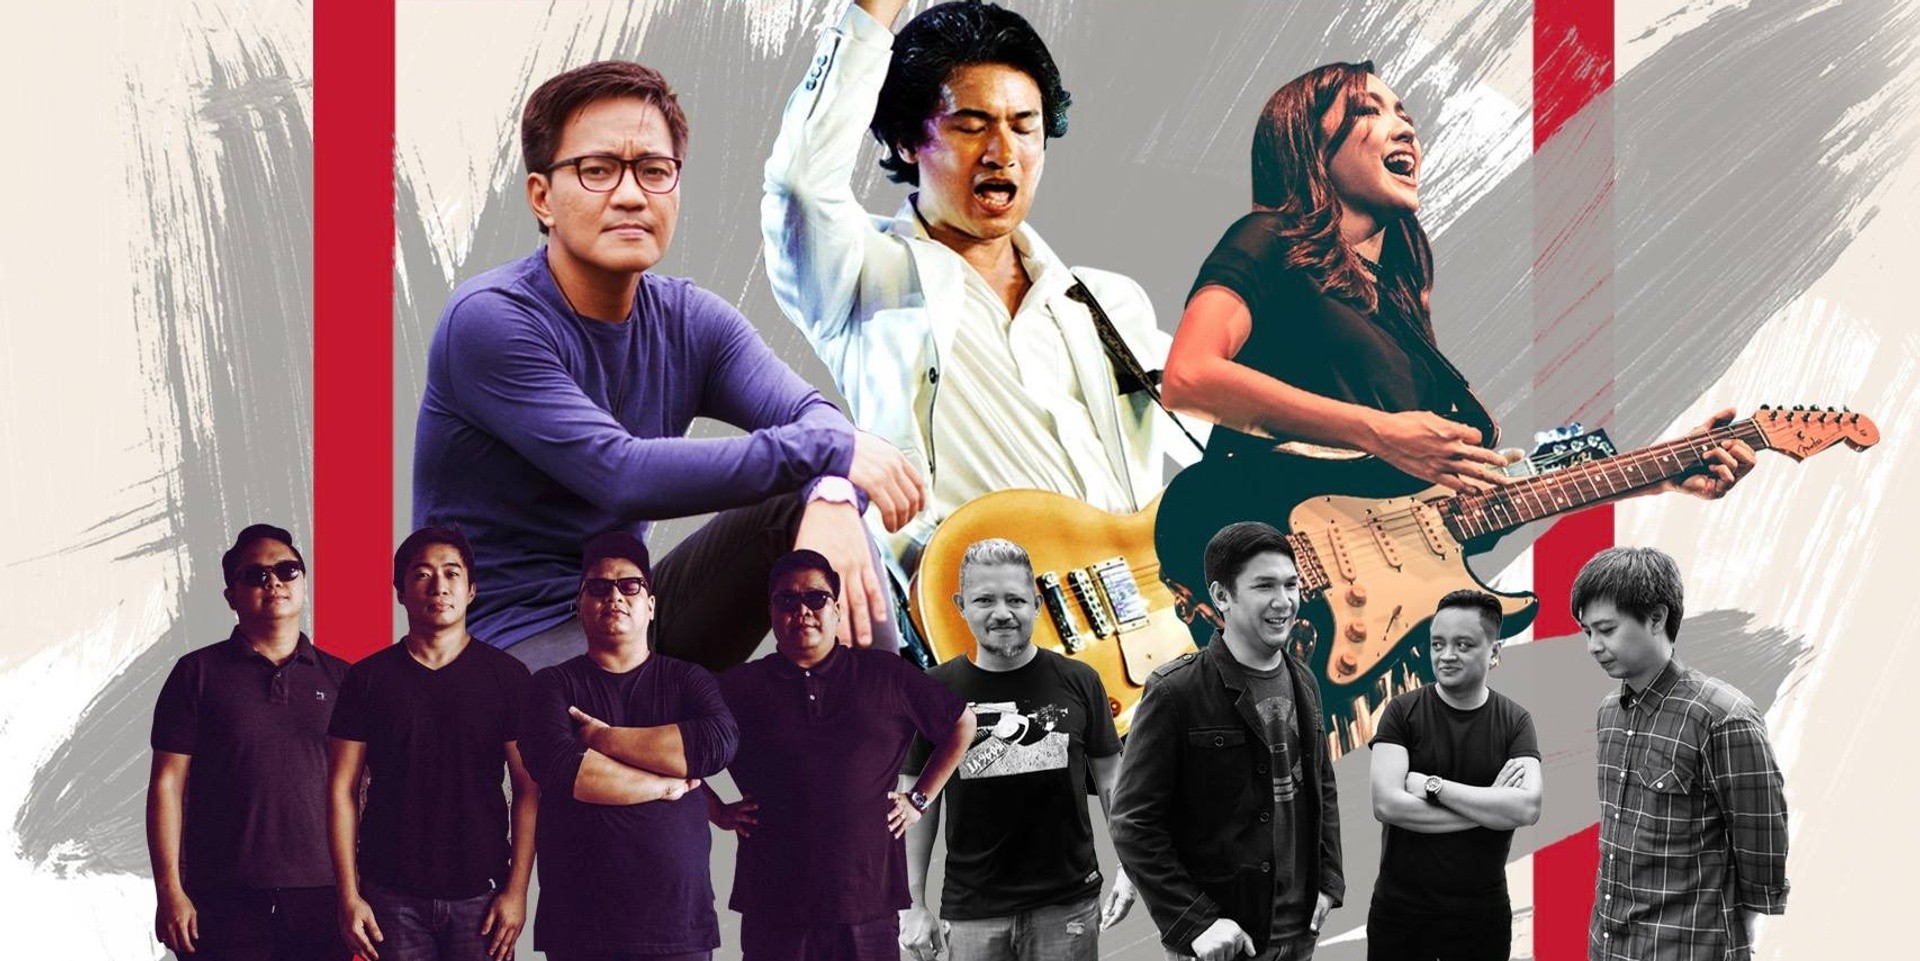 MCA Music and Smart Music Live team up to bring back the NURock Years